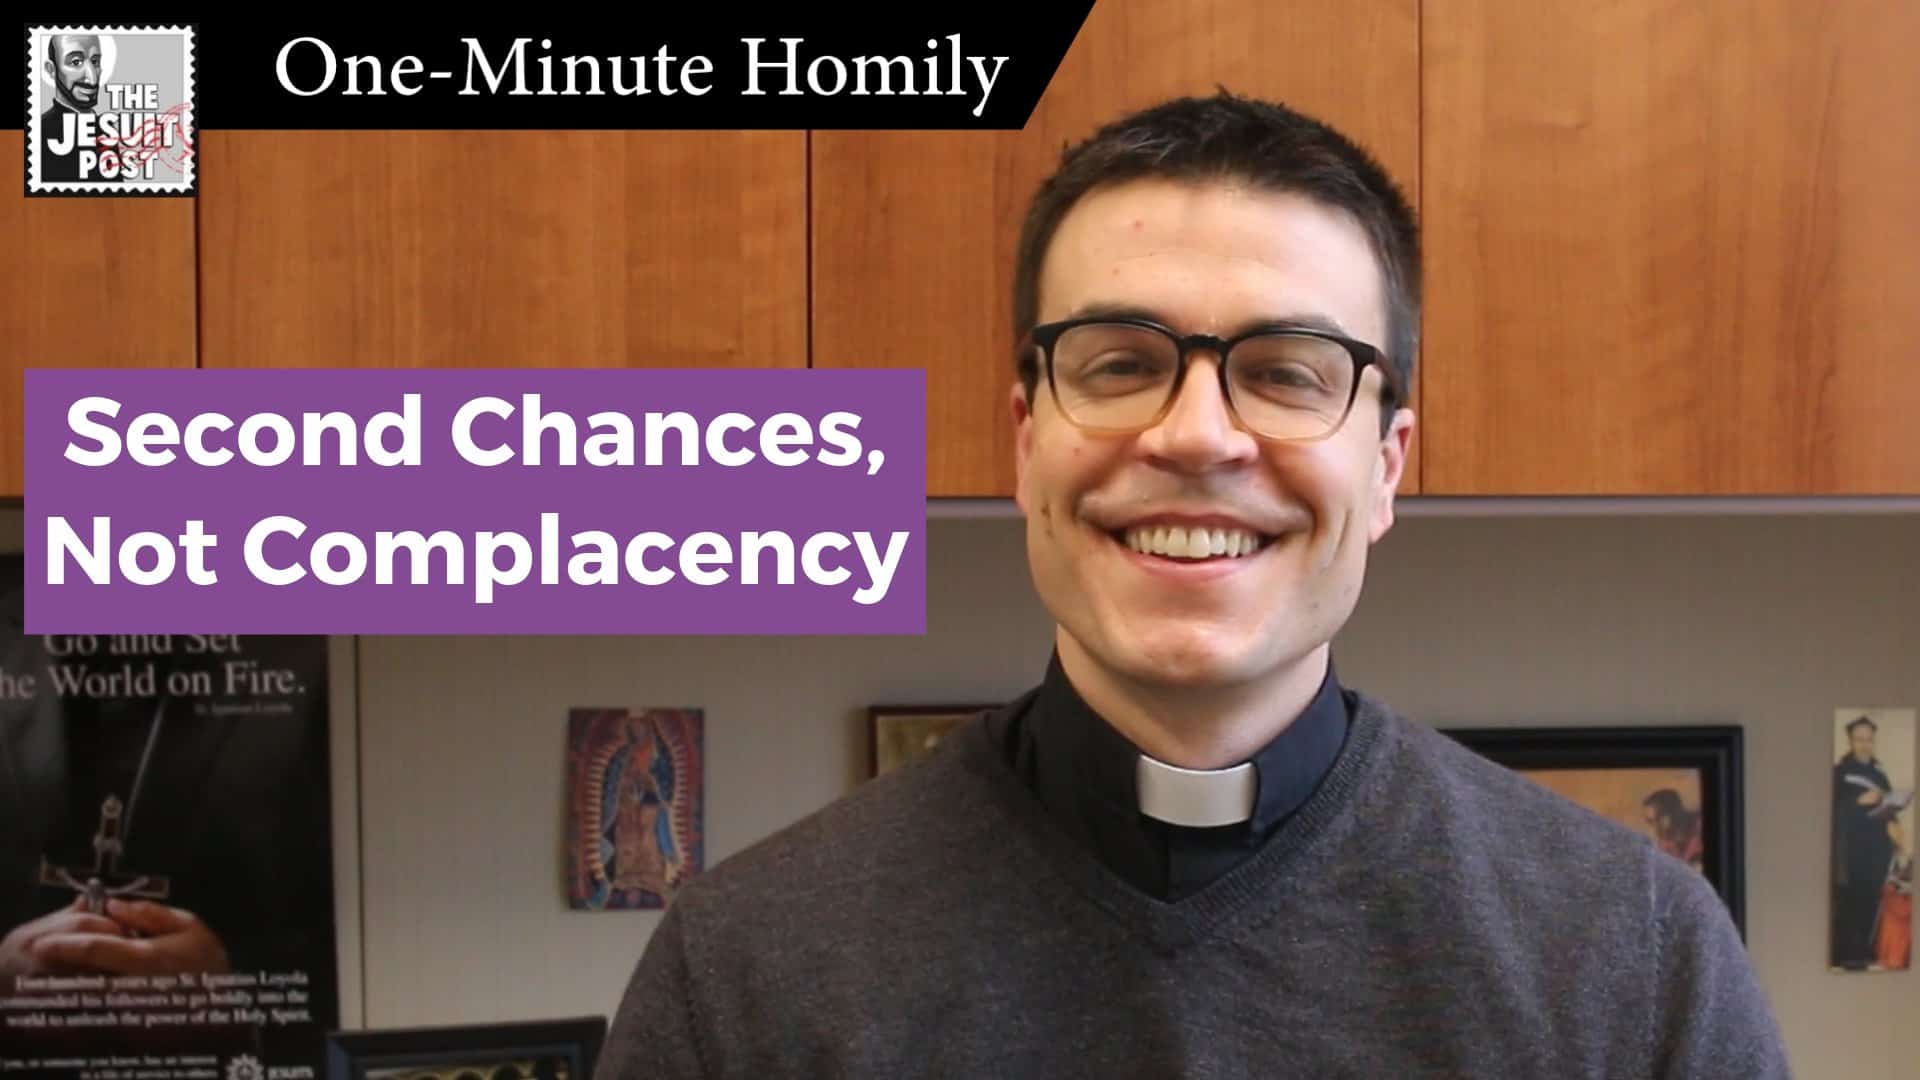 One-Minute Homily: “Second Chances, Not Complacency”